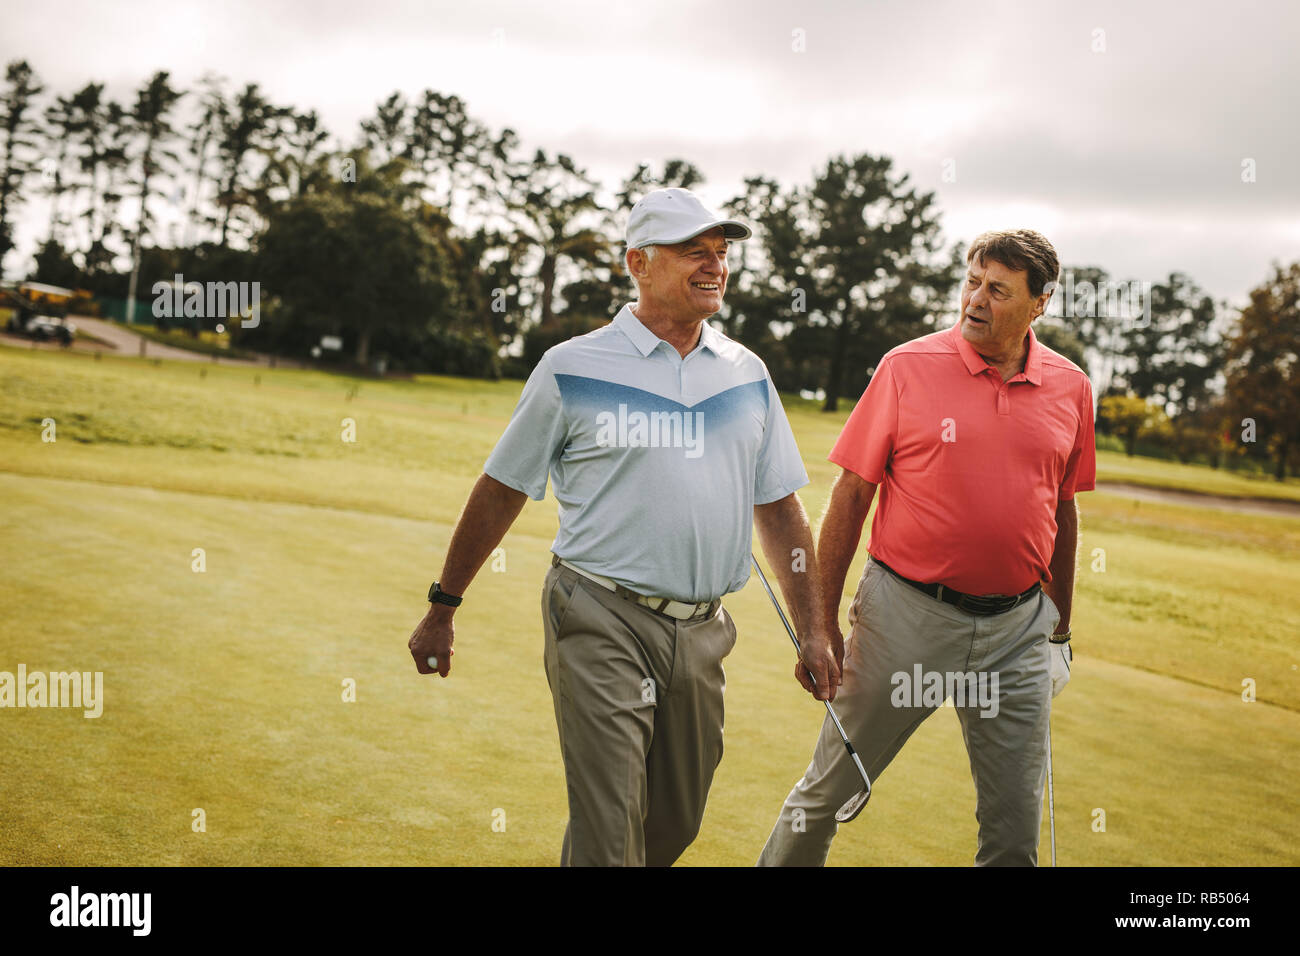 Two senior man playing golf are walking to the next hole. Professional golfers walking and talking on the golf course. Stock Photo